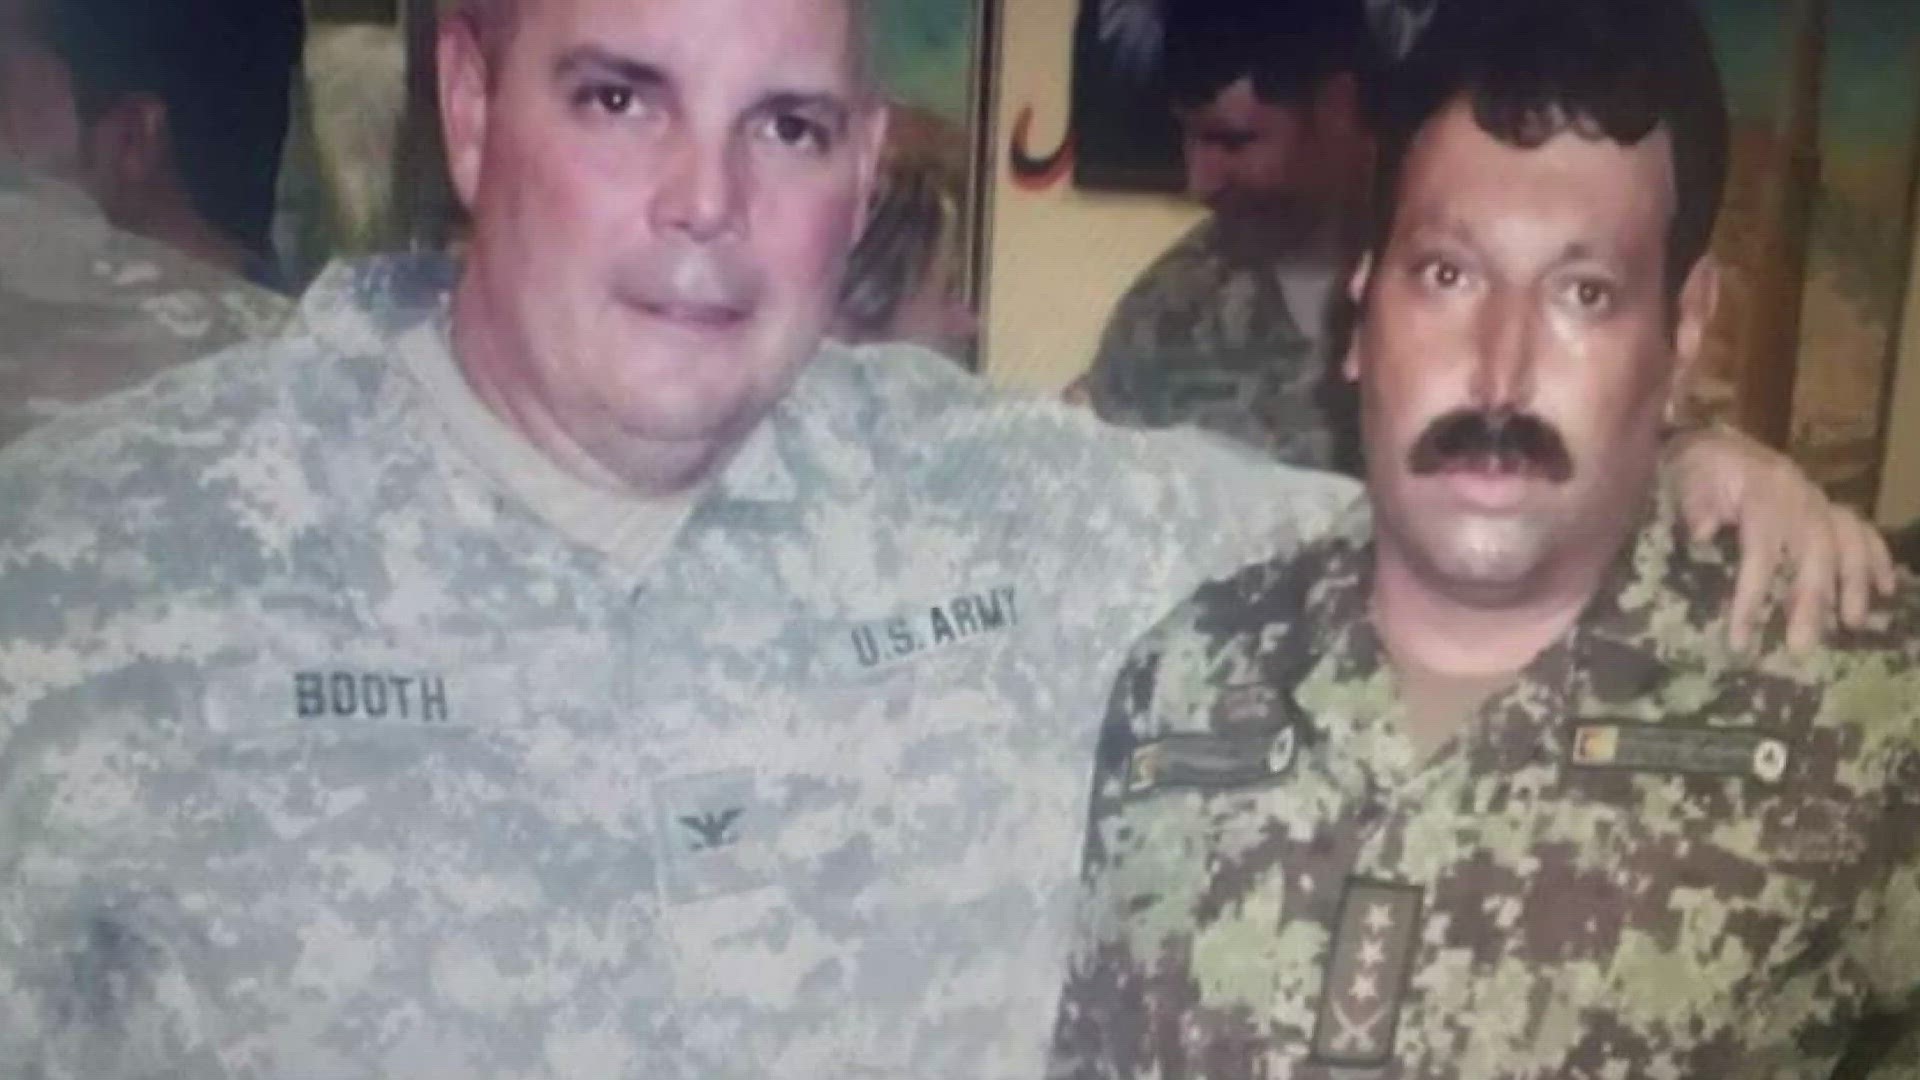 General Nezamuddin Rahmani served side-by-side with the U.S. military as they fought the Taliban. Now, they've threatened him.